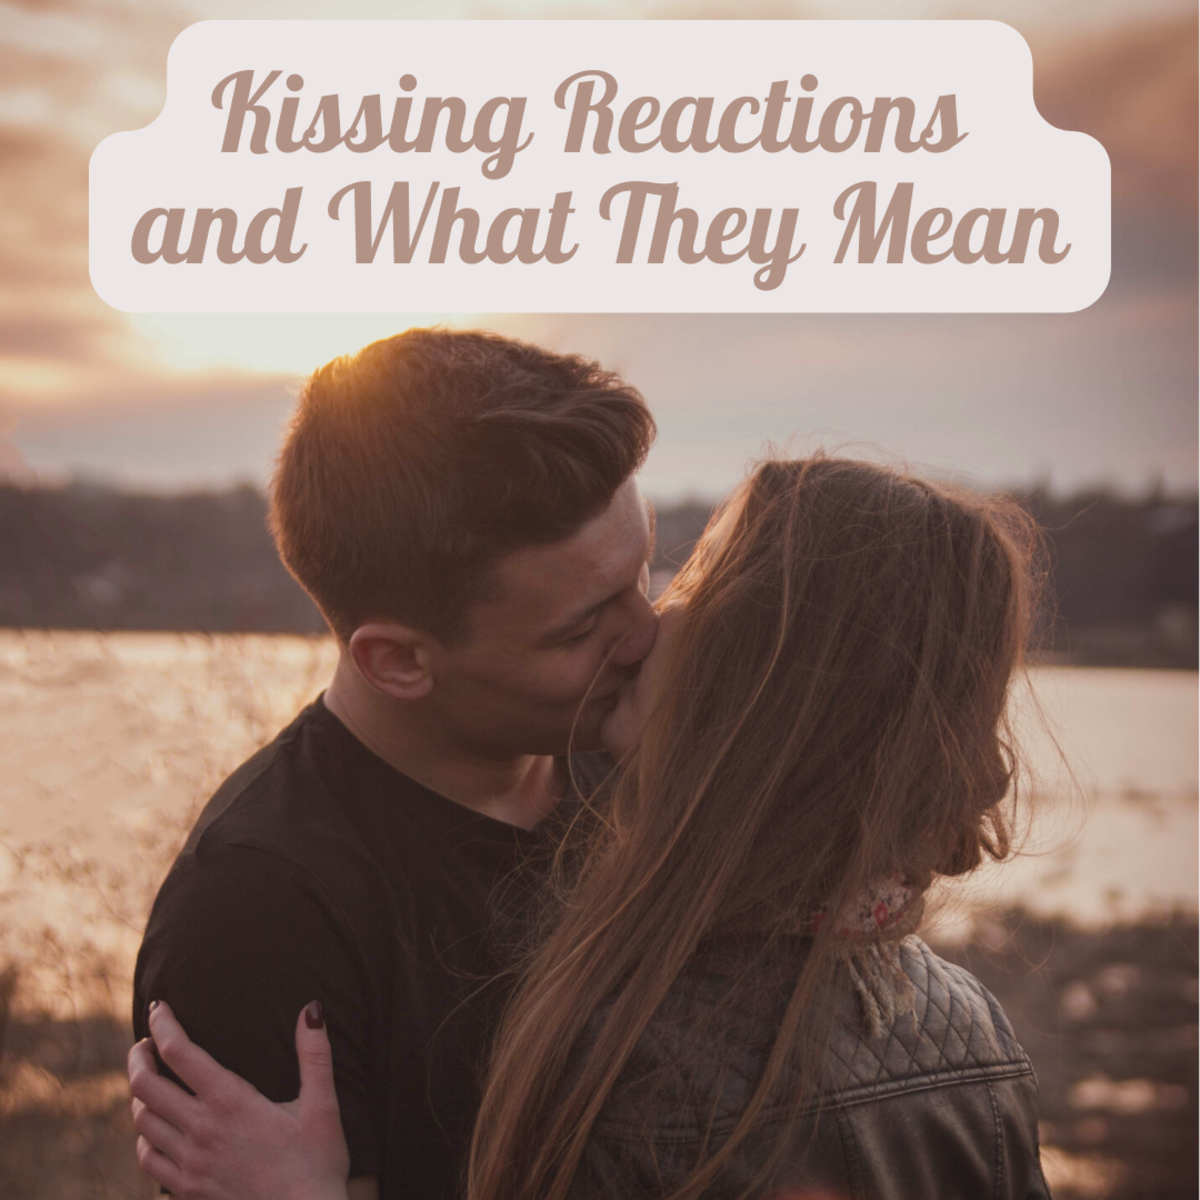 10 Kissing Reactions You Should Know and What They Mean